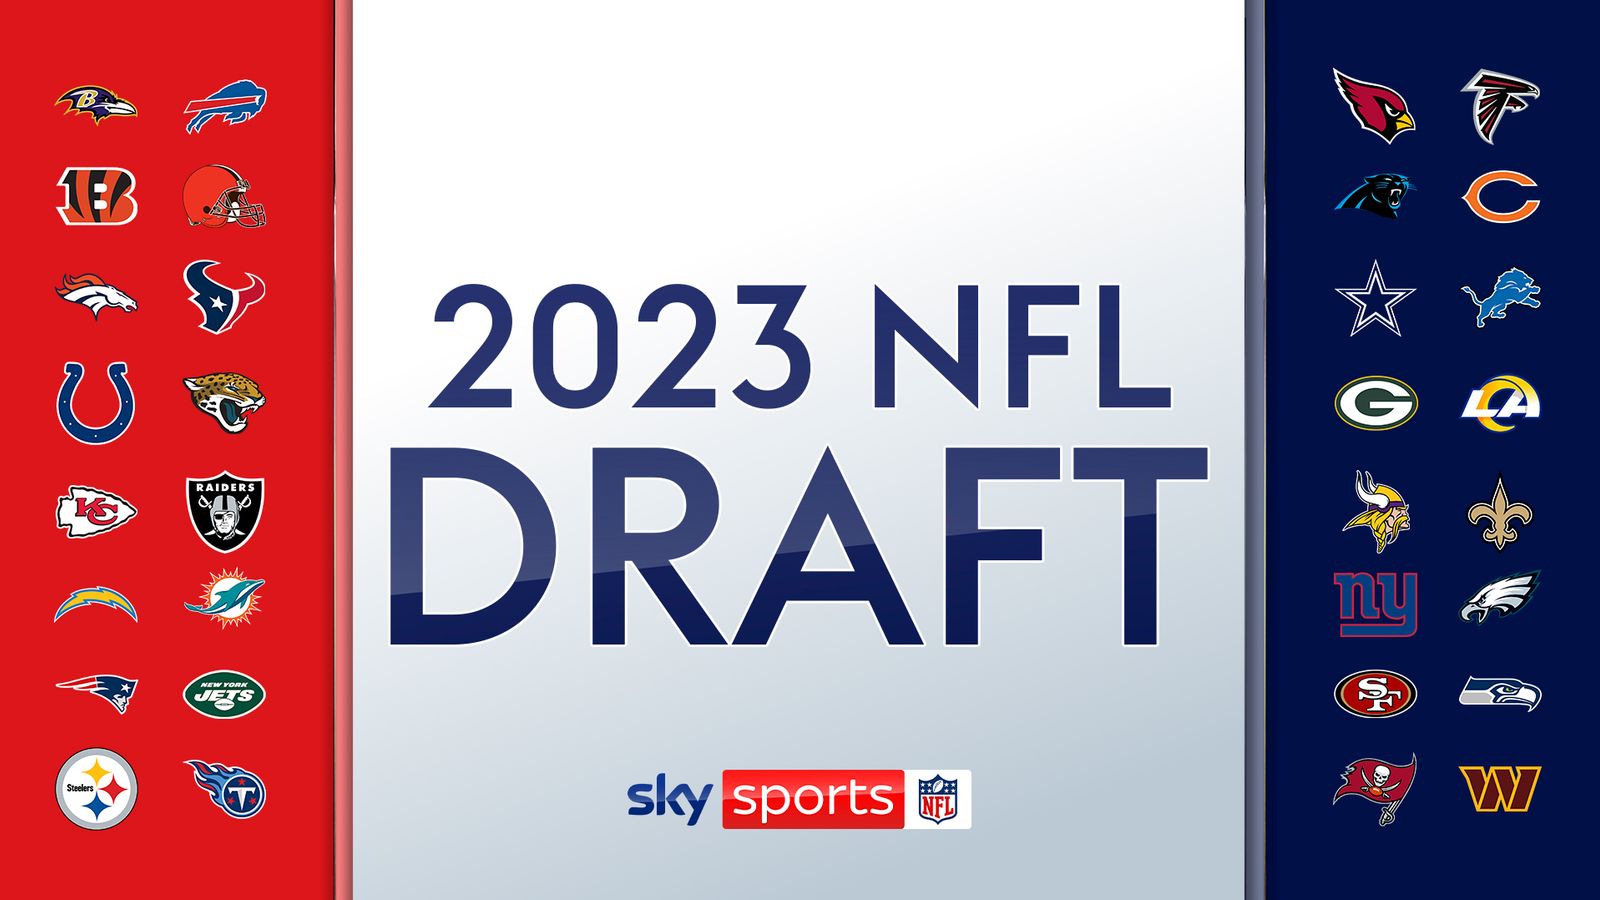 How to watch the NFL 2020 Draft: Start times, TV channels and